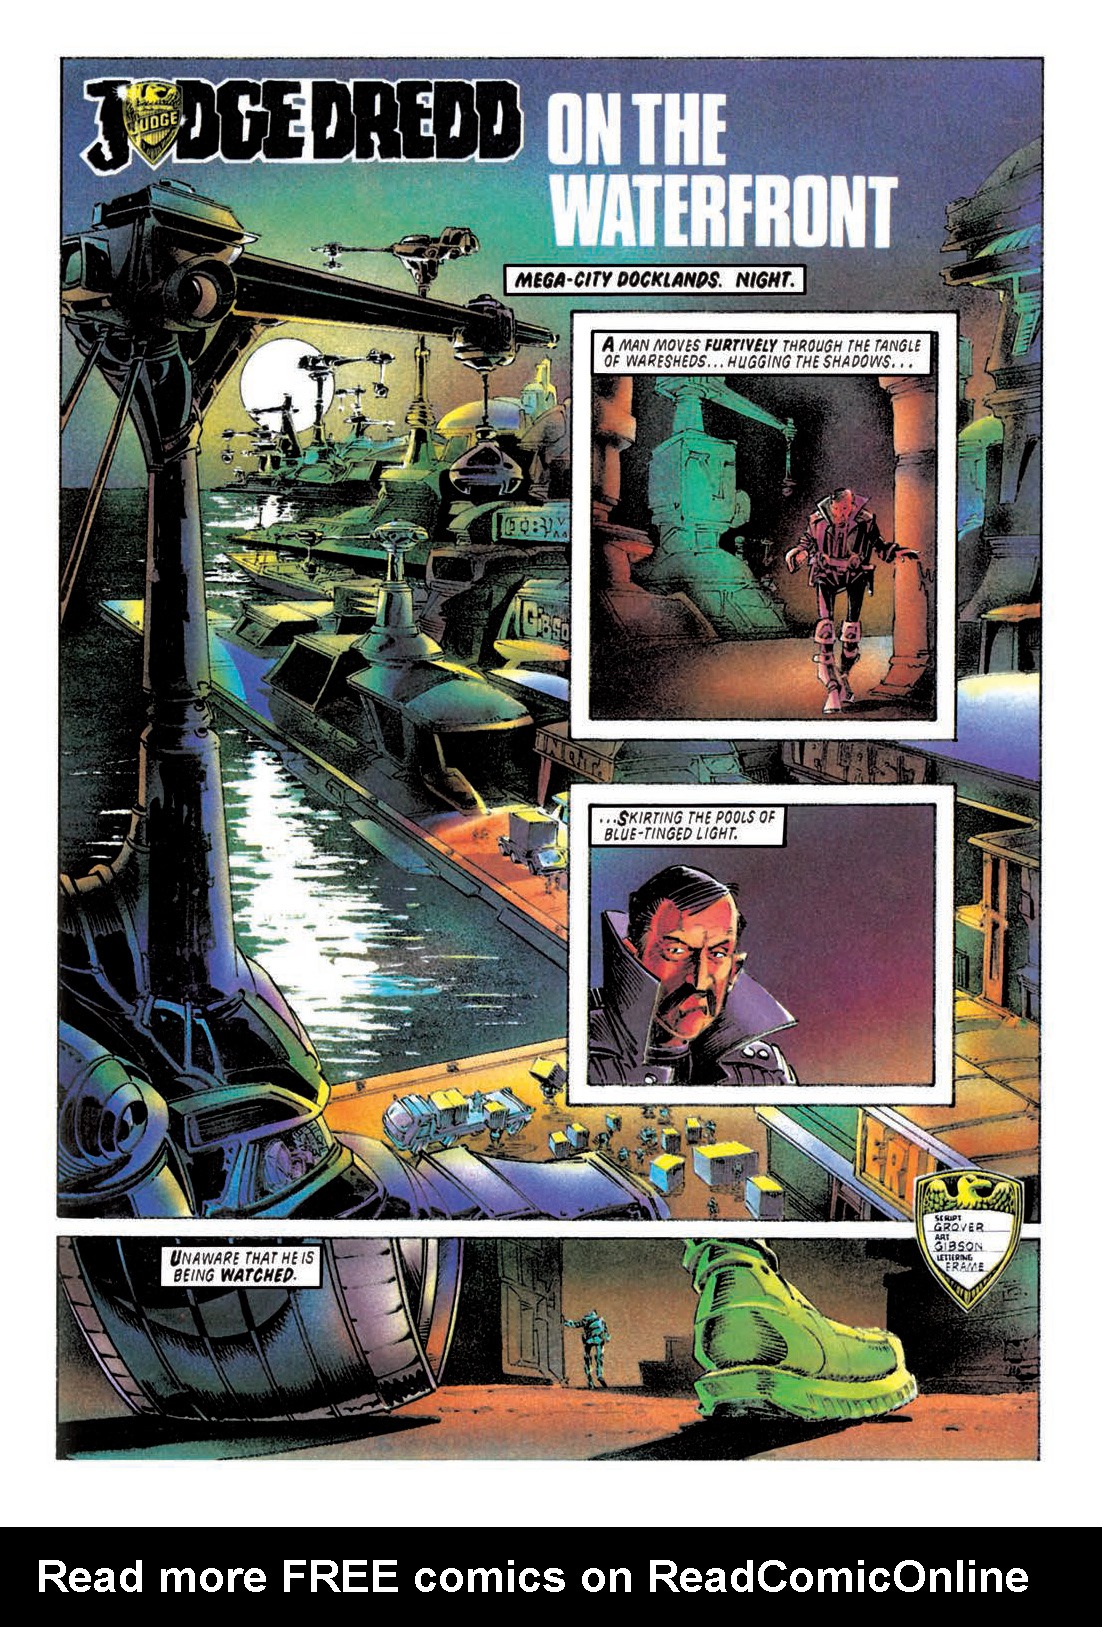 Read online Judge Dredd: The Restricted Files comic -  Issue # TPB 2 - 16